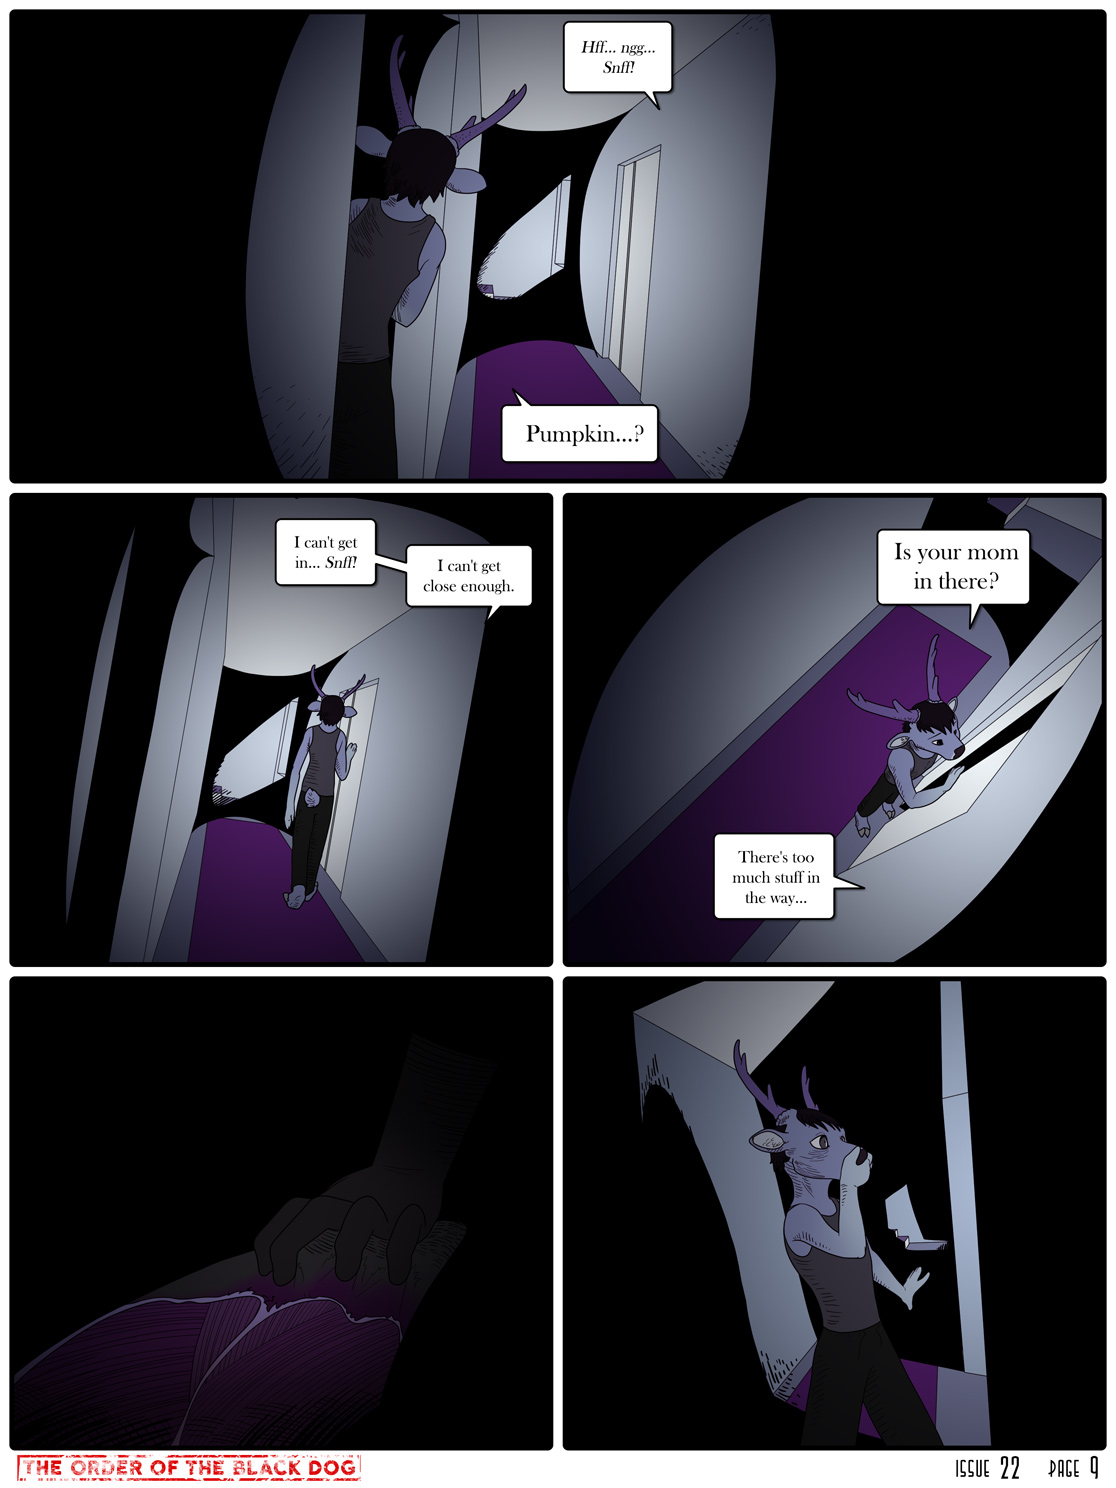 Issue 22, Page 9